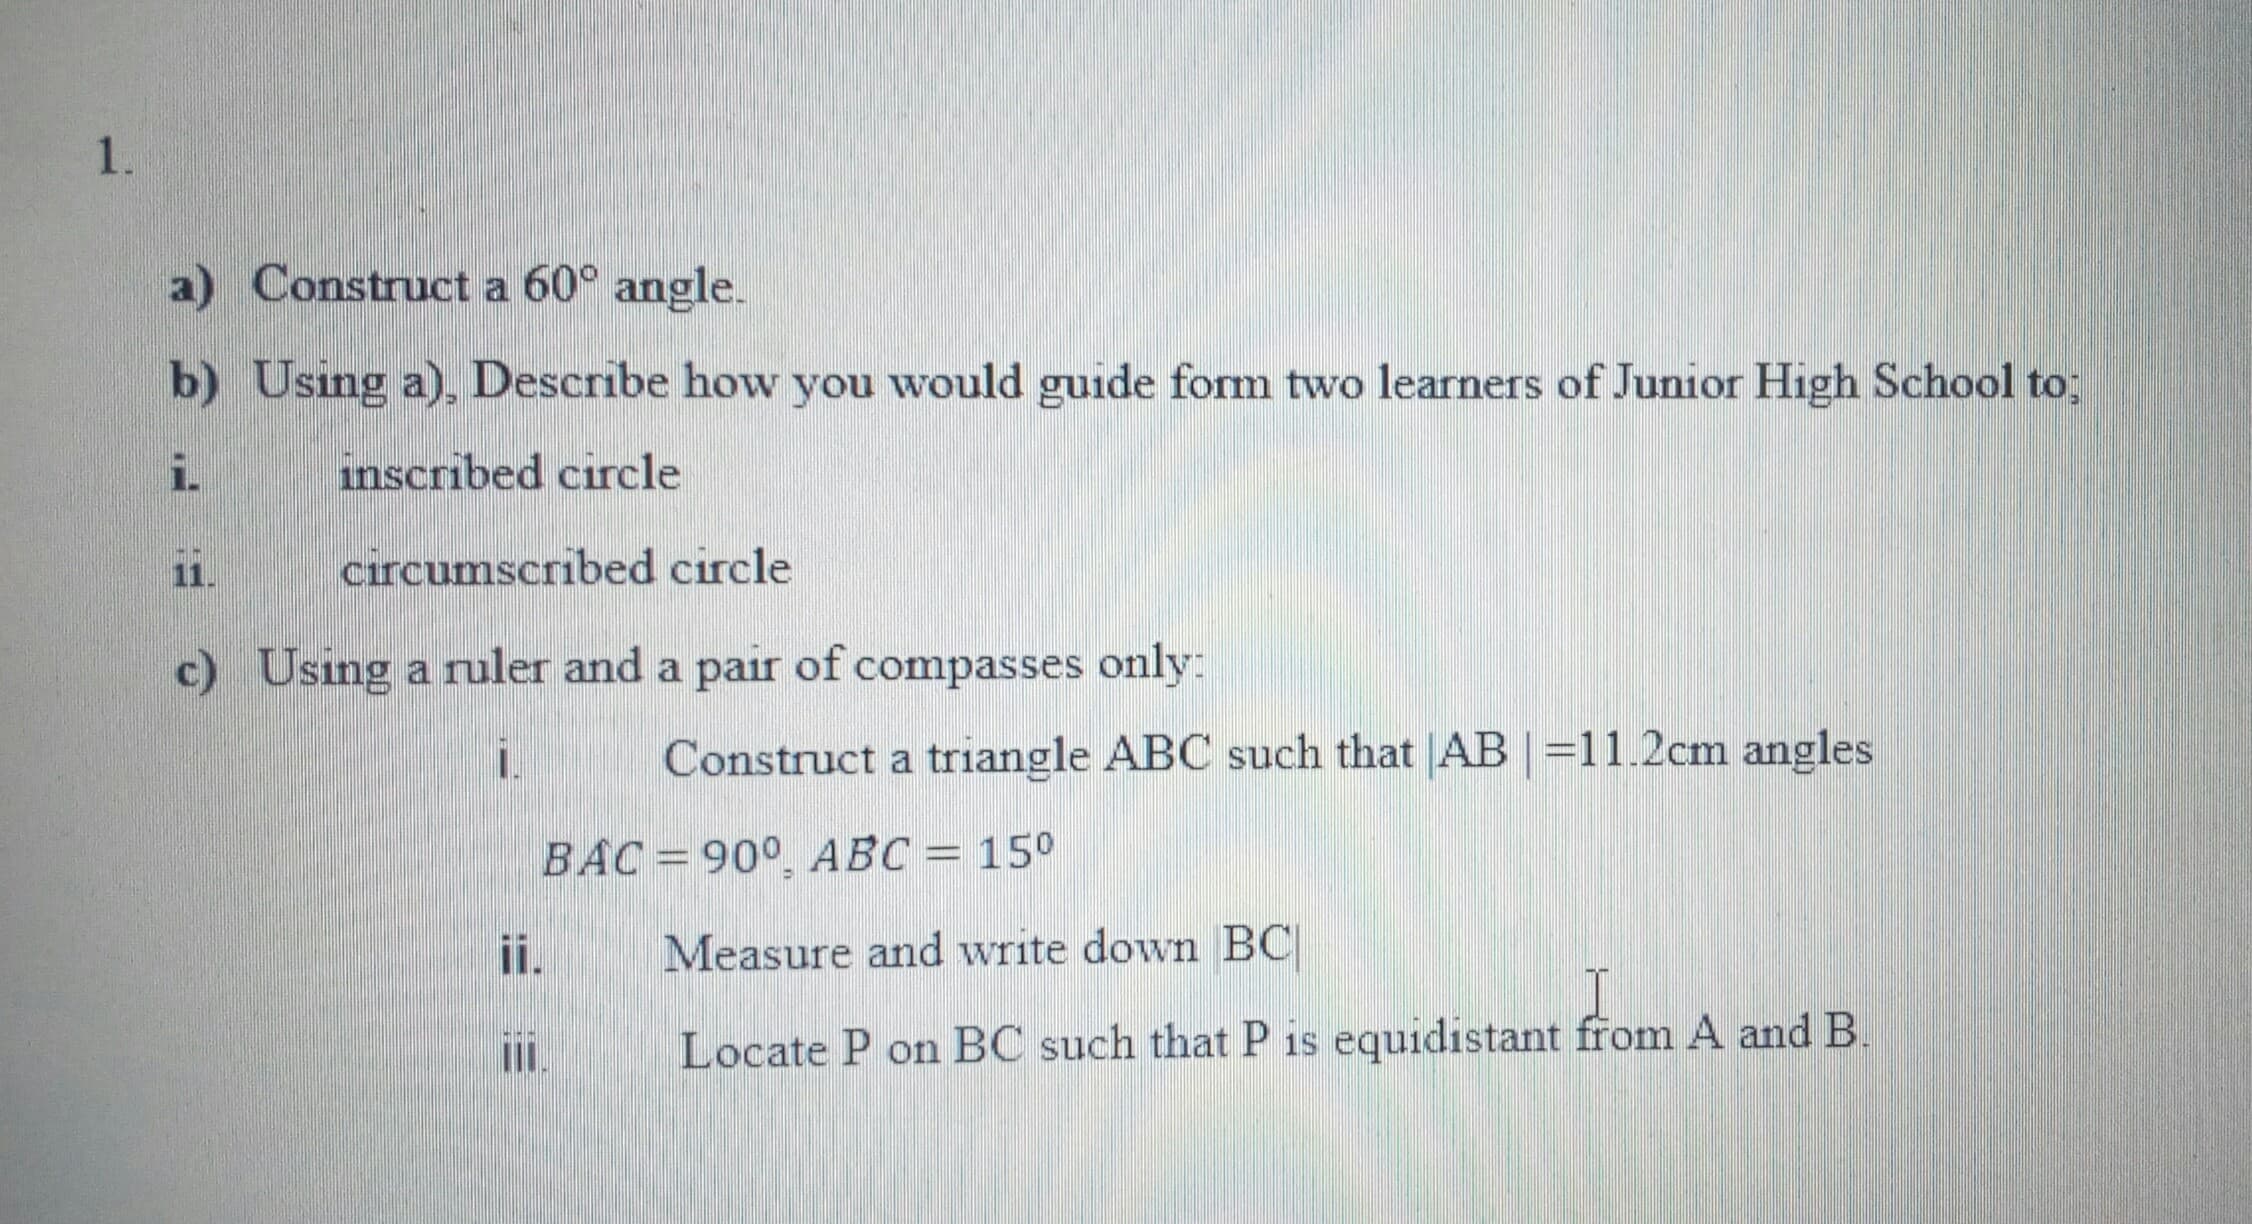 a) Construct a 60° angle.
b) Using a), Describe how you would guide form two learners of Junior High School to;
i.
inscribed circle
11.
circumscribed circle
